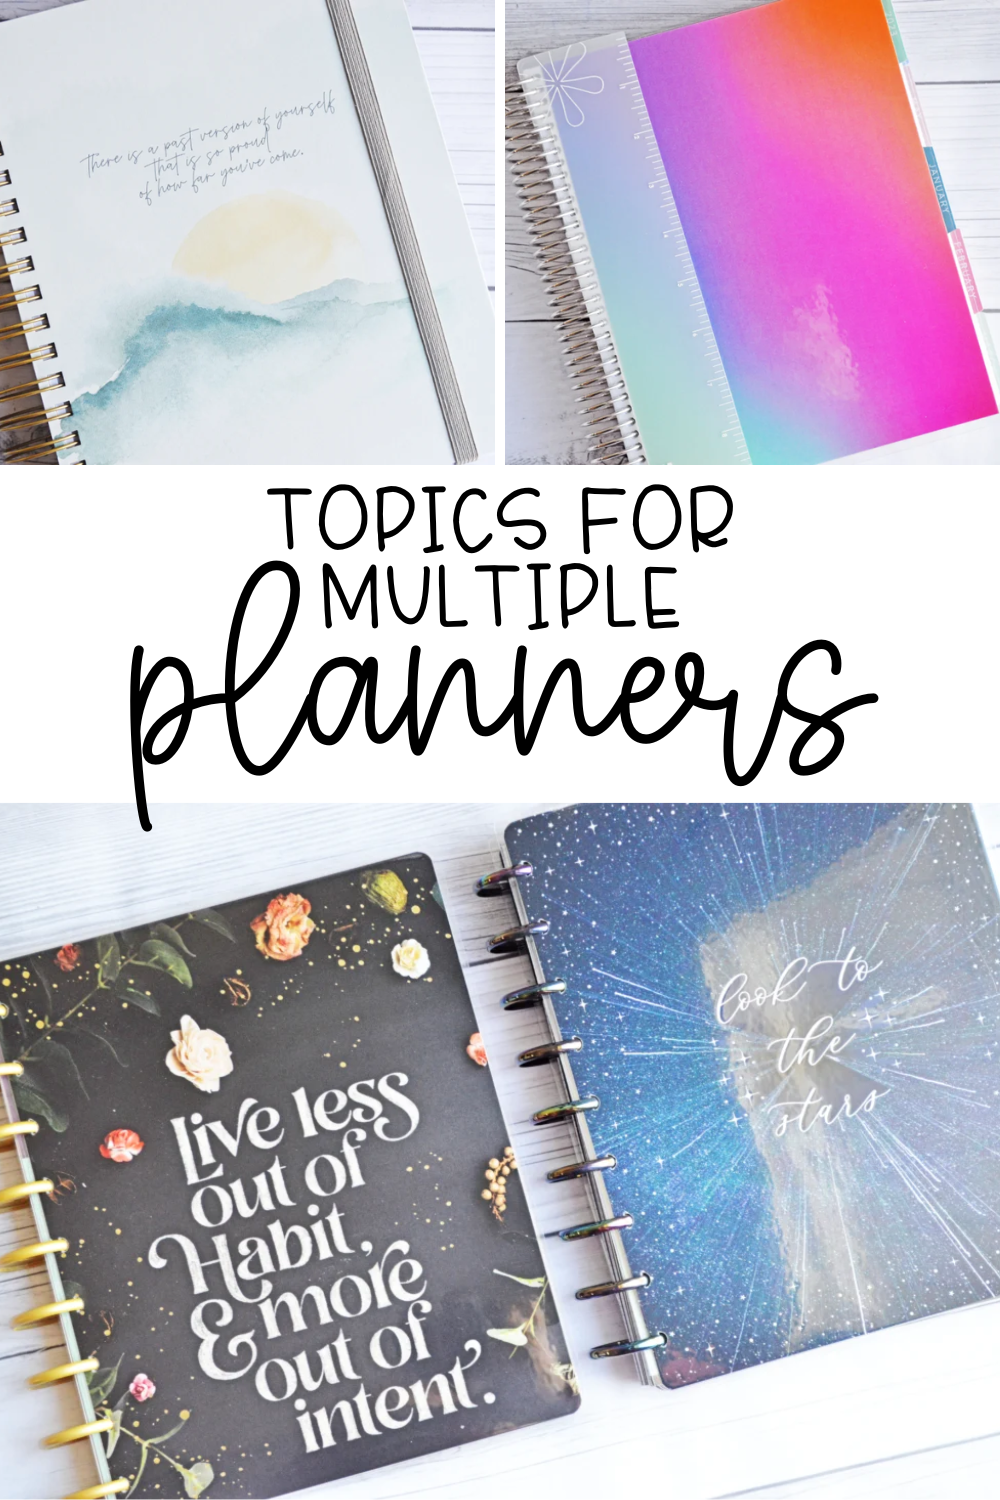 Topics for Multiple Planners